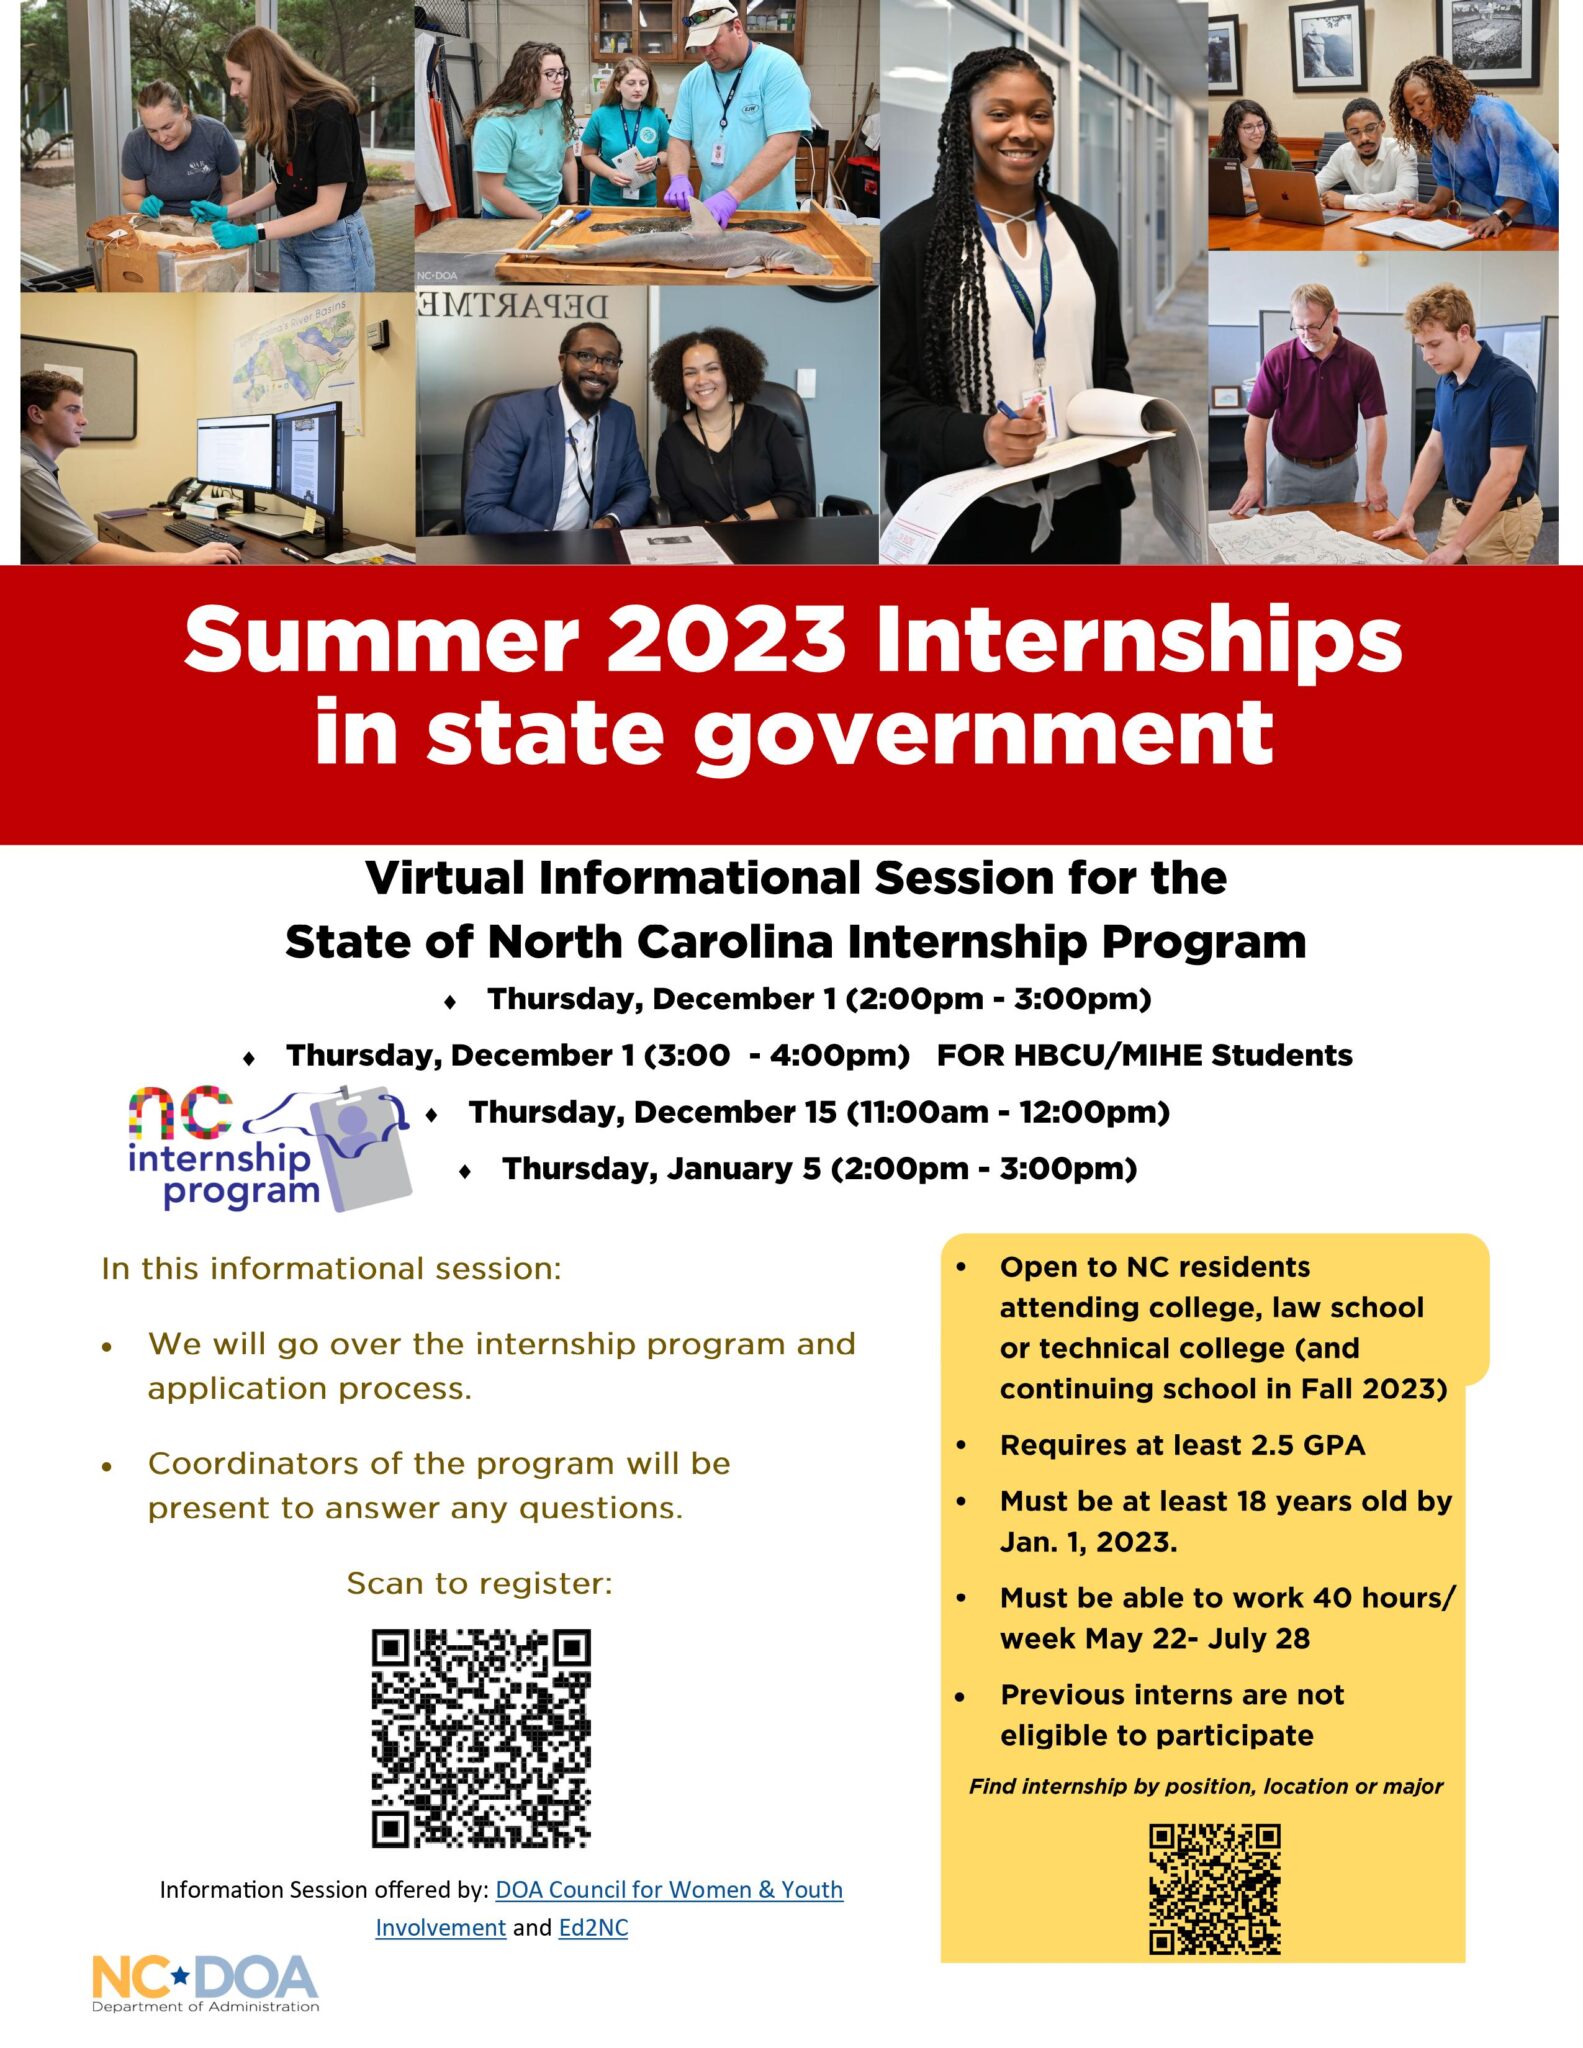 NC Government Virtual Informational Session for Summer Internships